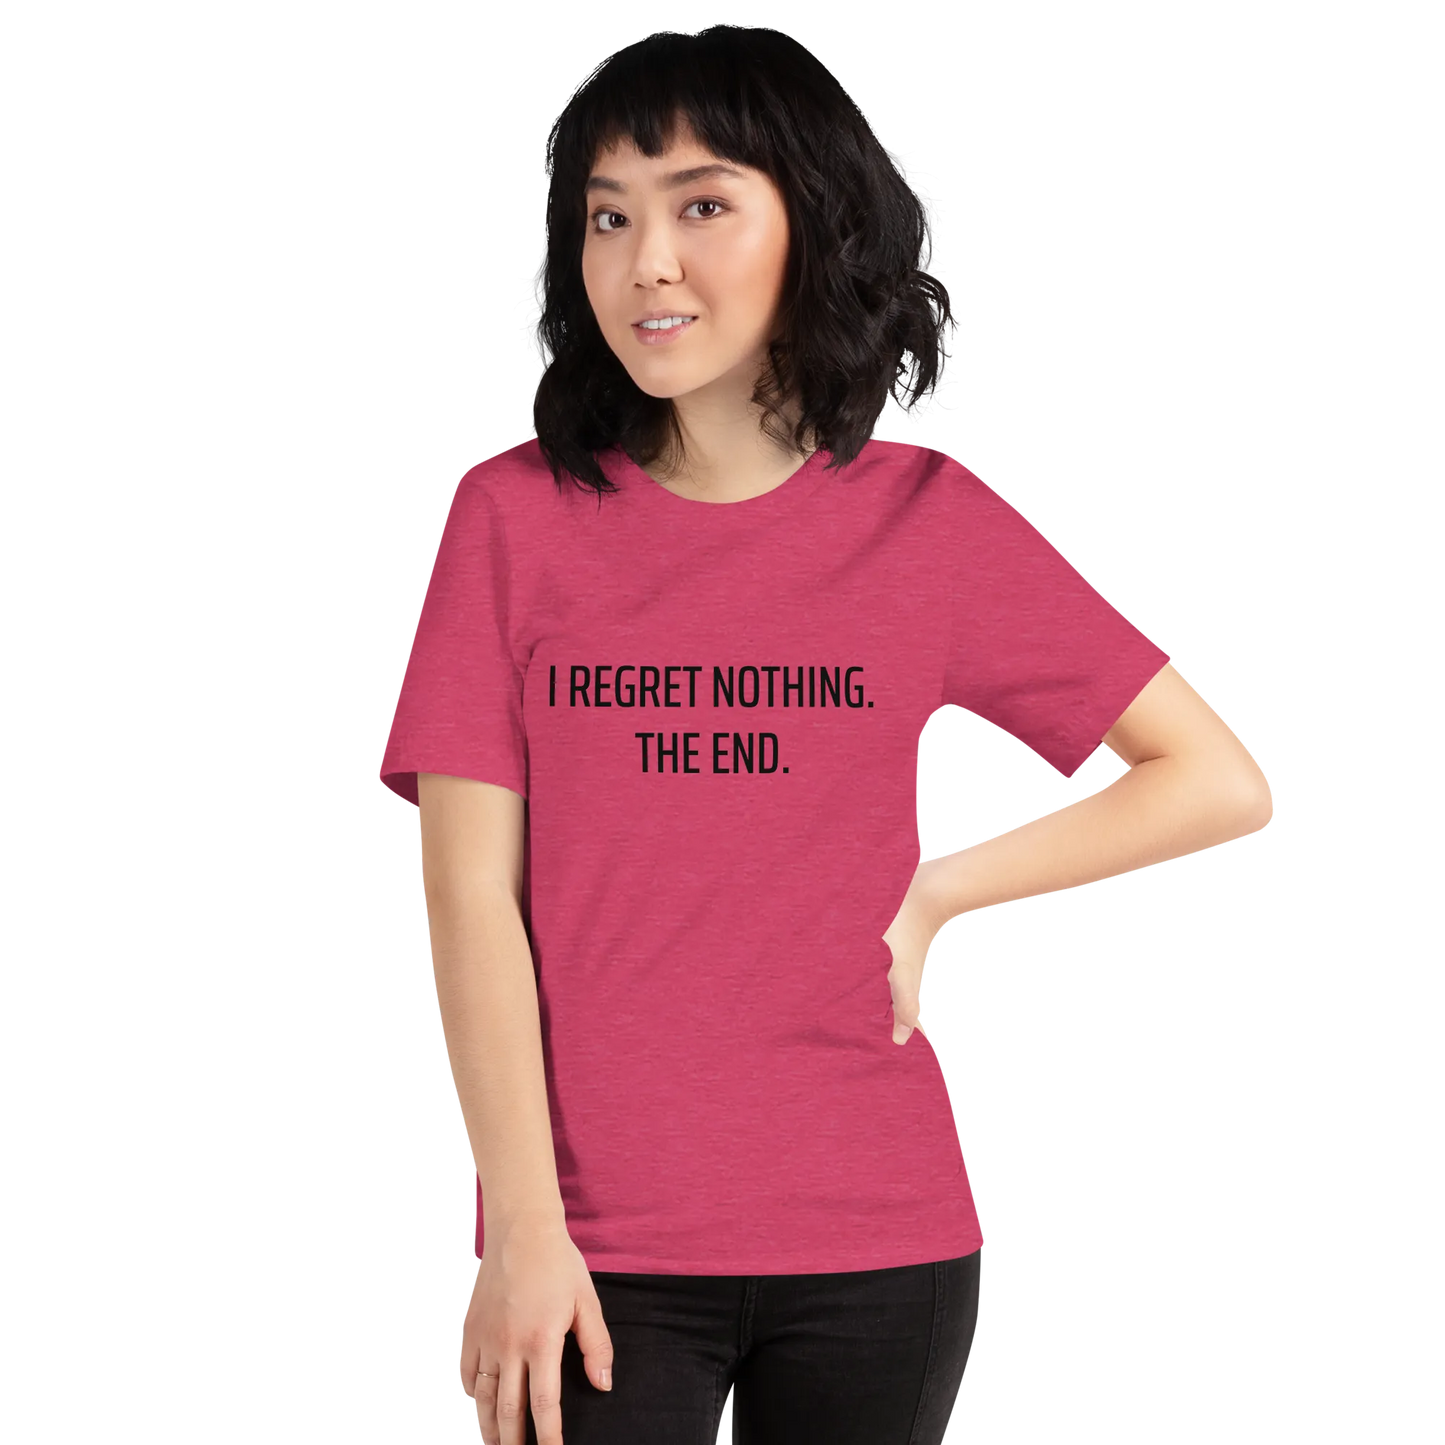 I Regret Nothing Tee in Heather Raspberry on woman front